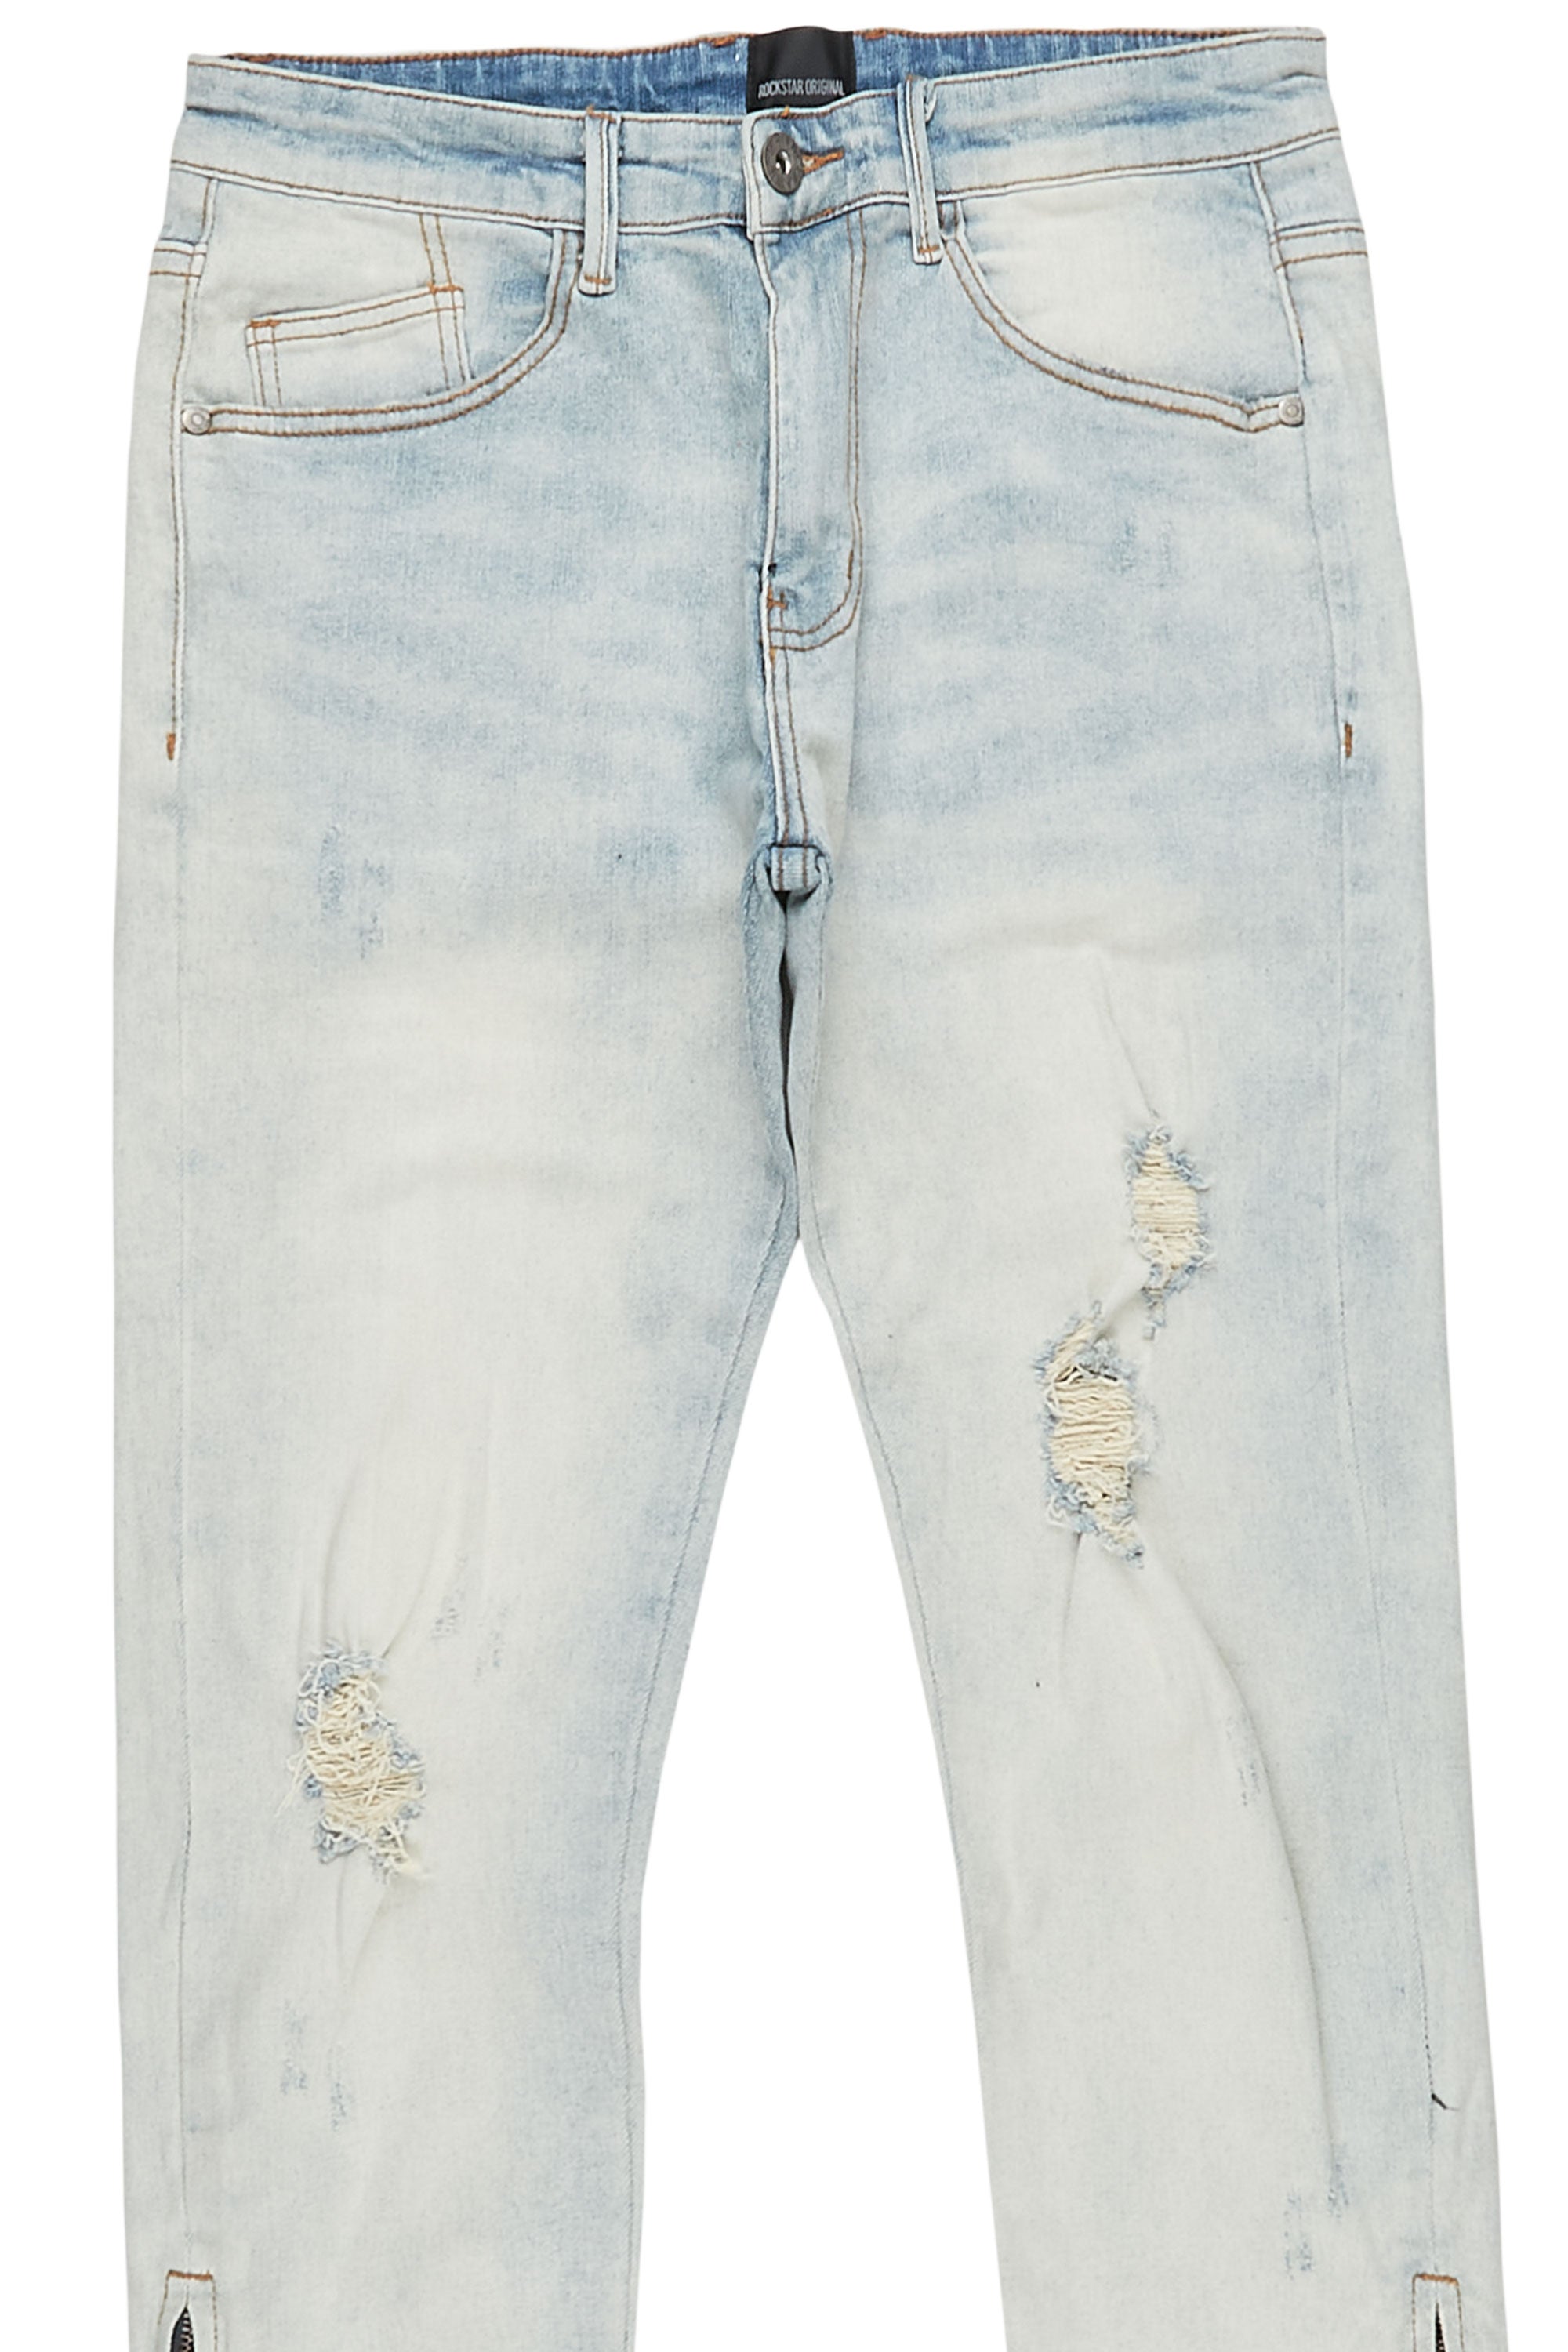 Quico Vintage Light Blue Stacked Flare Jean